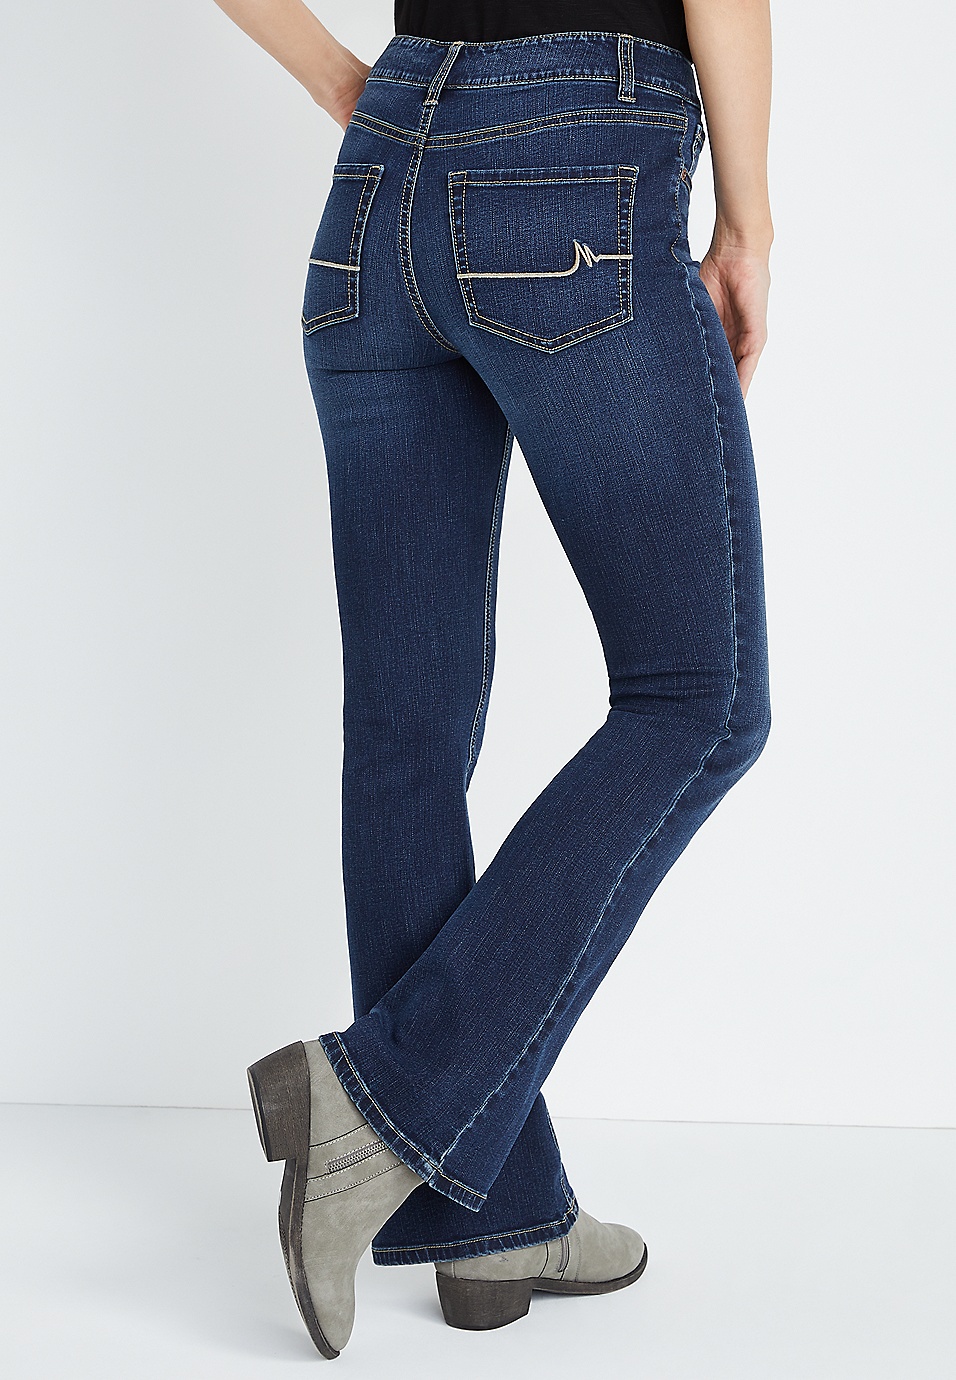 m jeans by maurices™ Slim Straight Ankle Mid Rise Jean